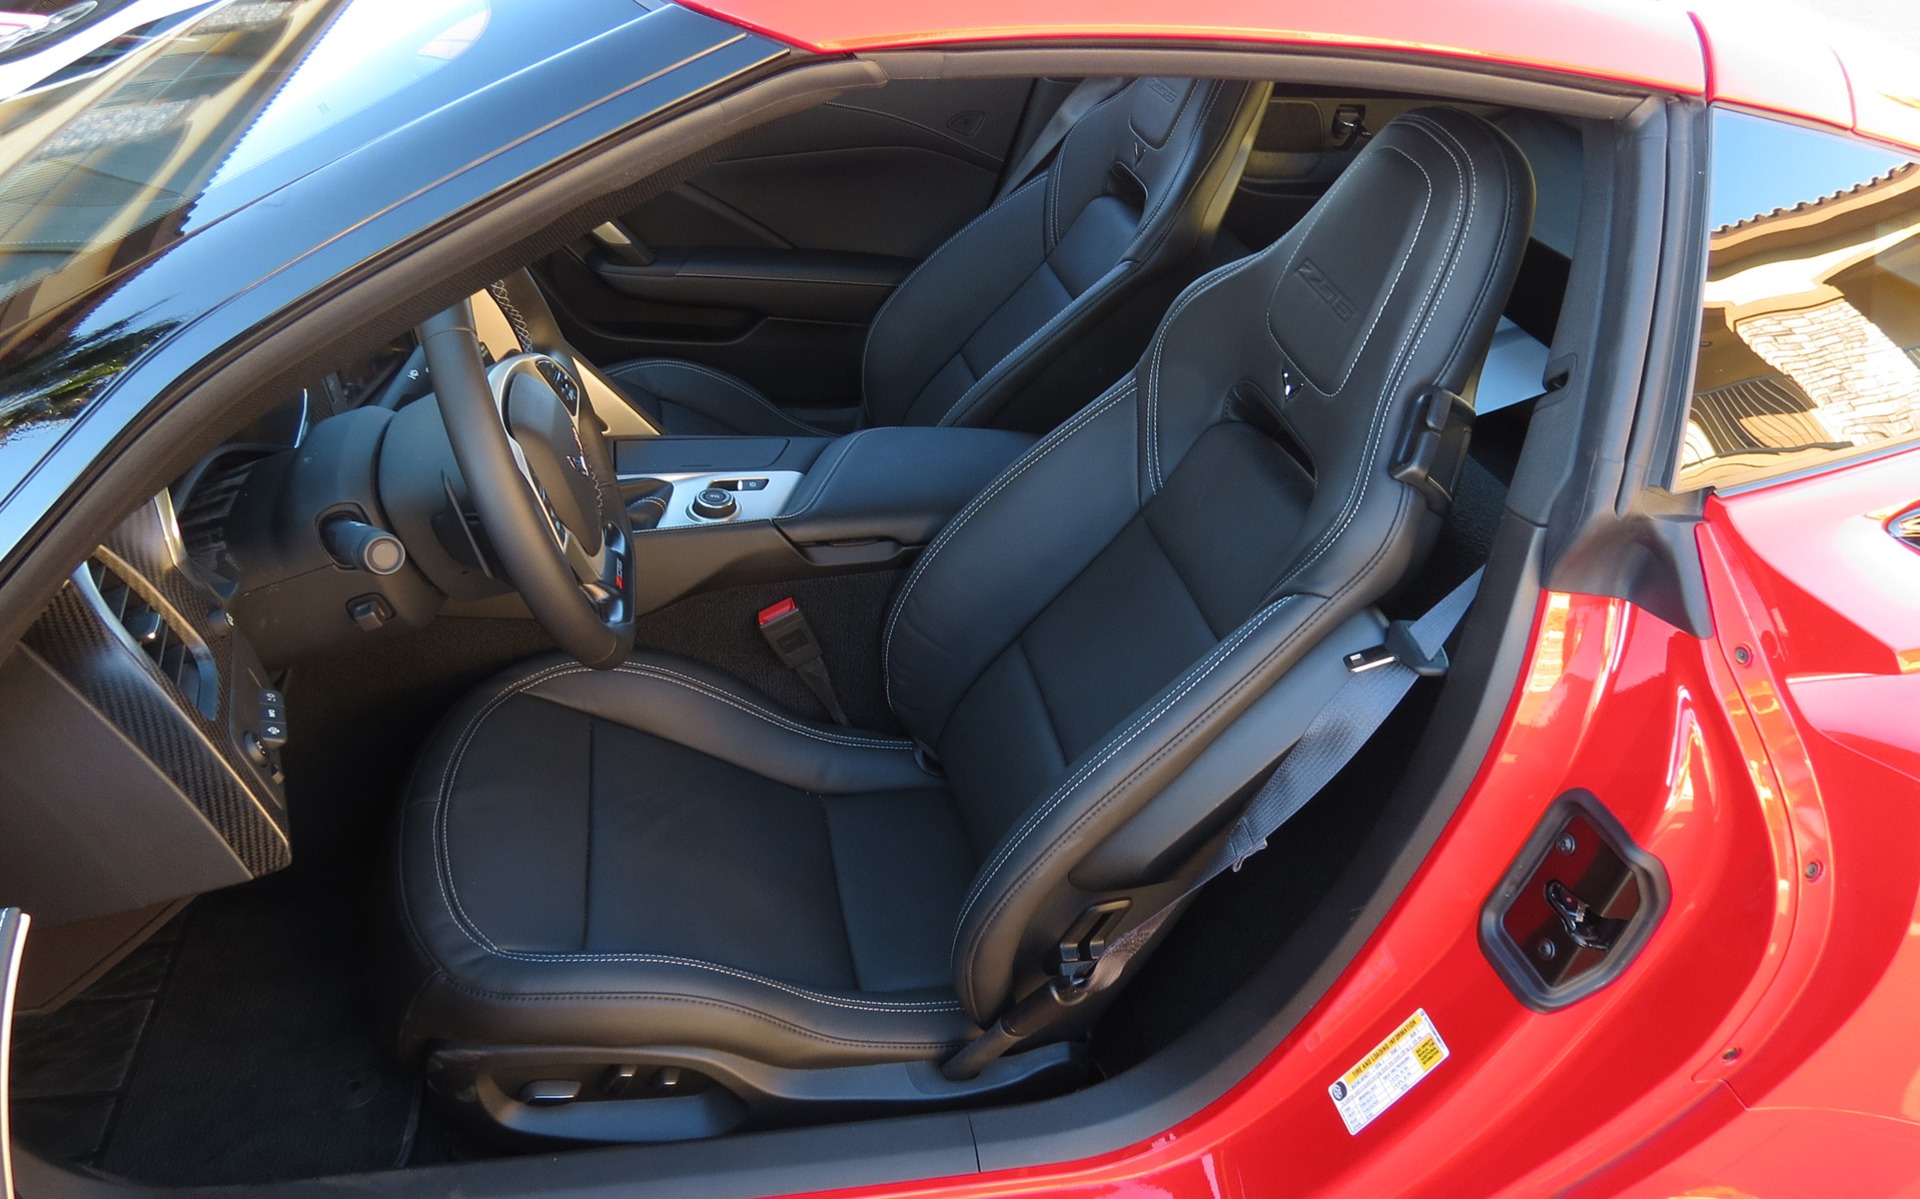 The stock GT bucket seats are more indulgent, and offer more adjustment.